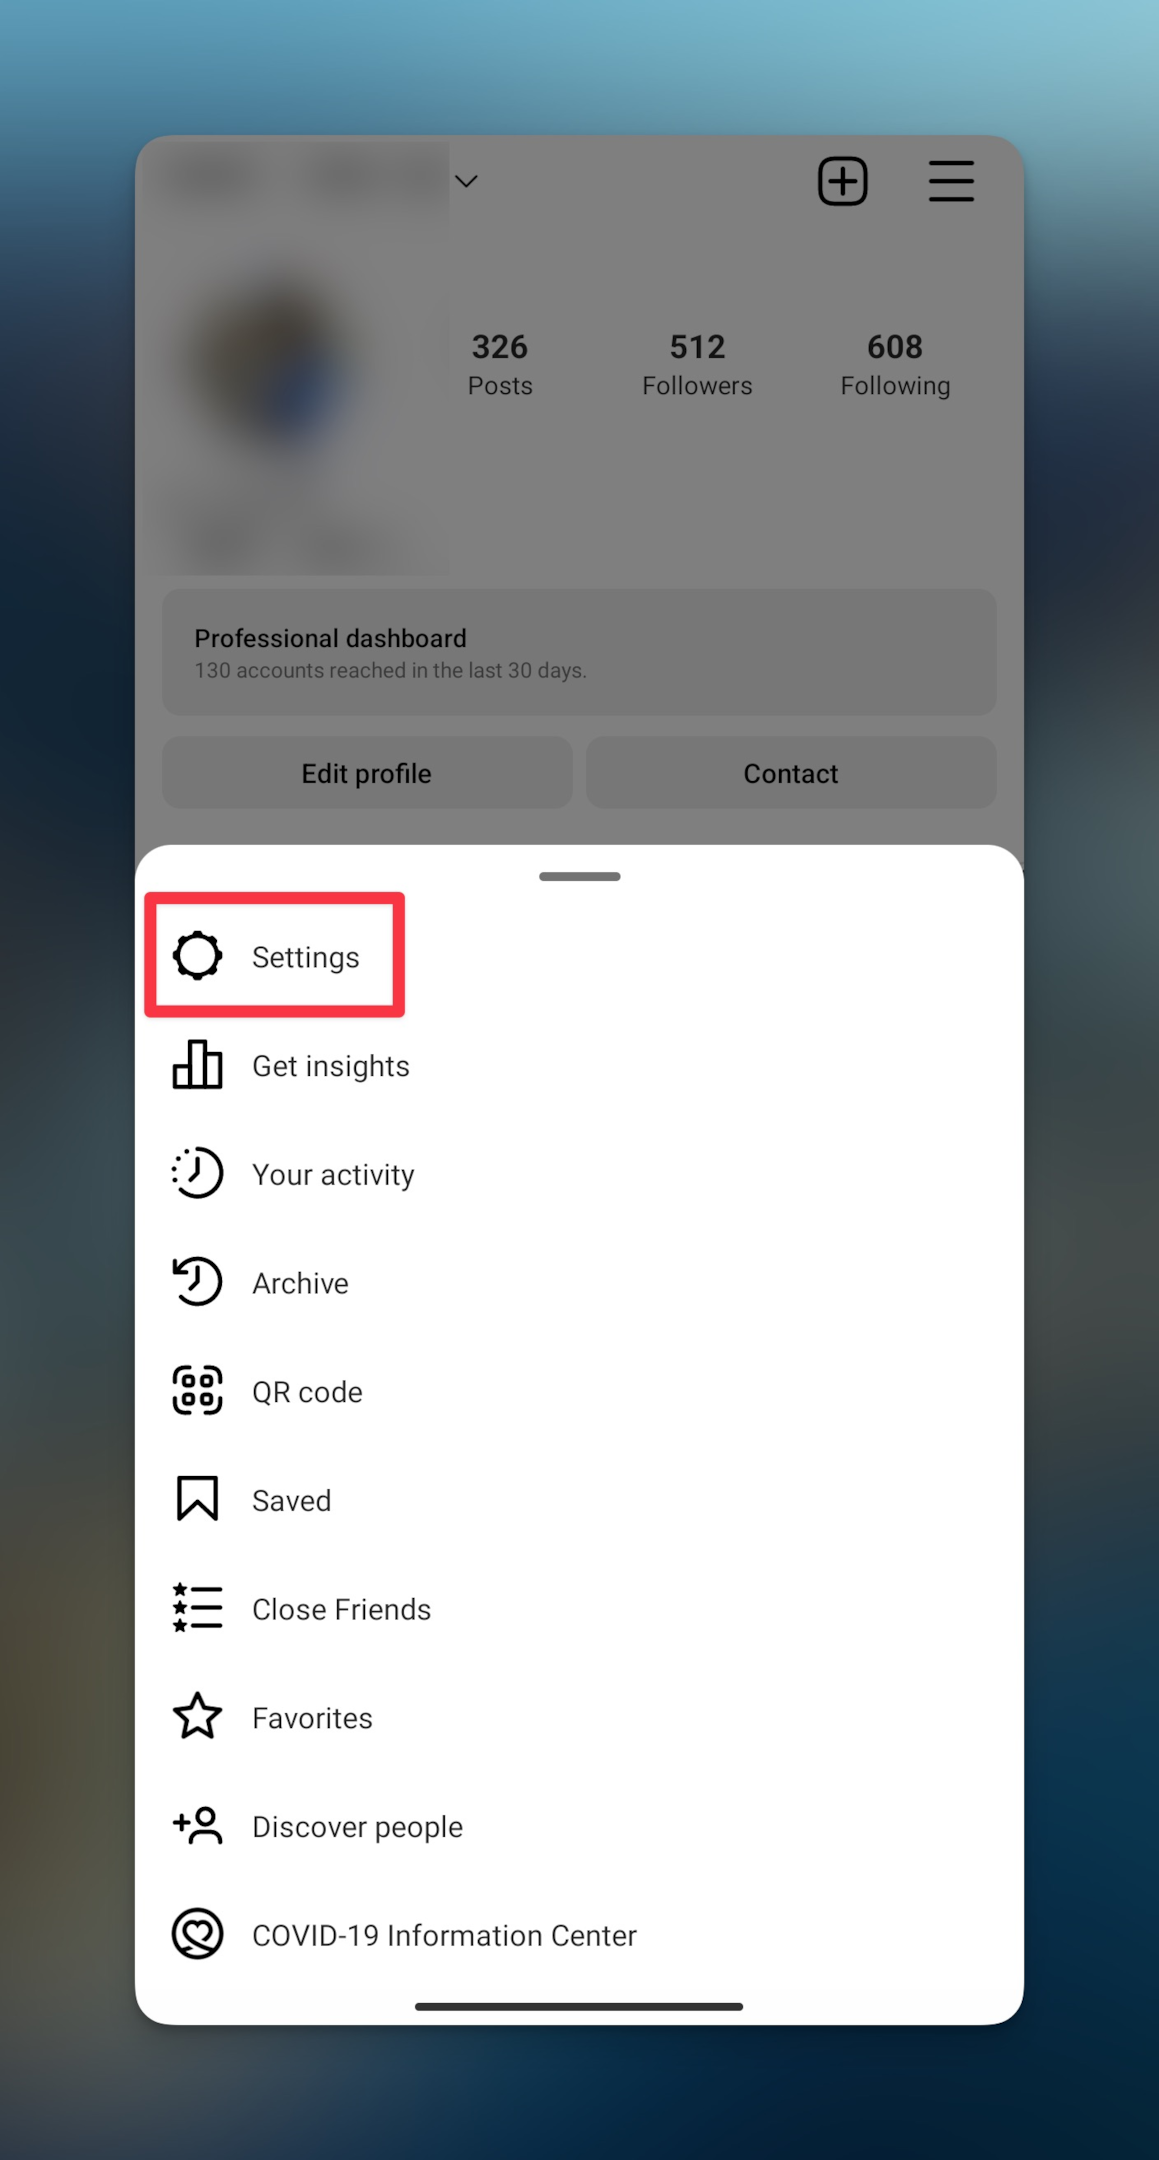 Remote.tools showing to tap on Settings under Instagram profile to switch to private account